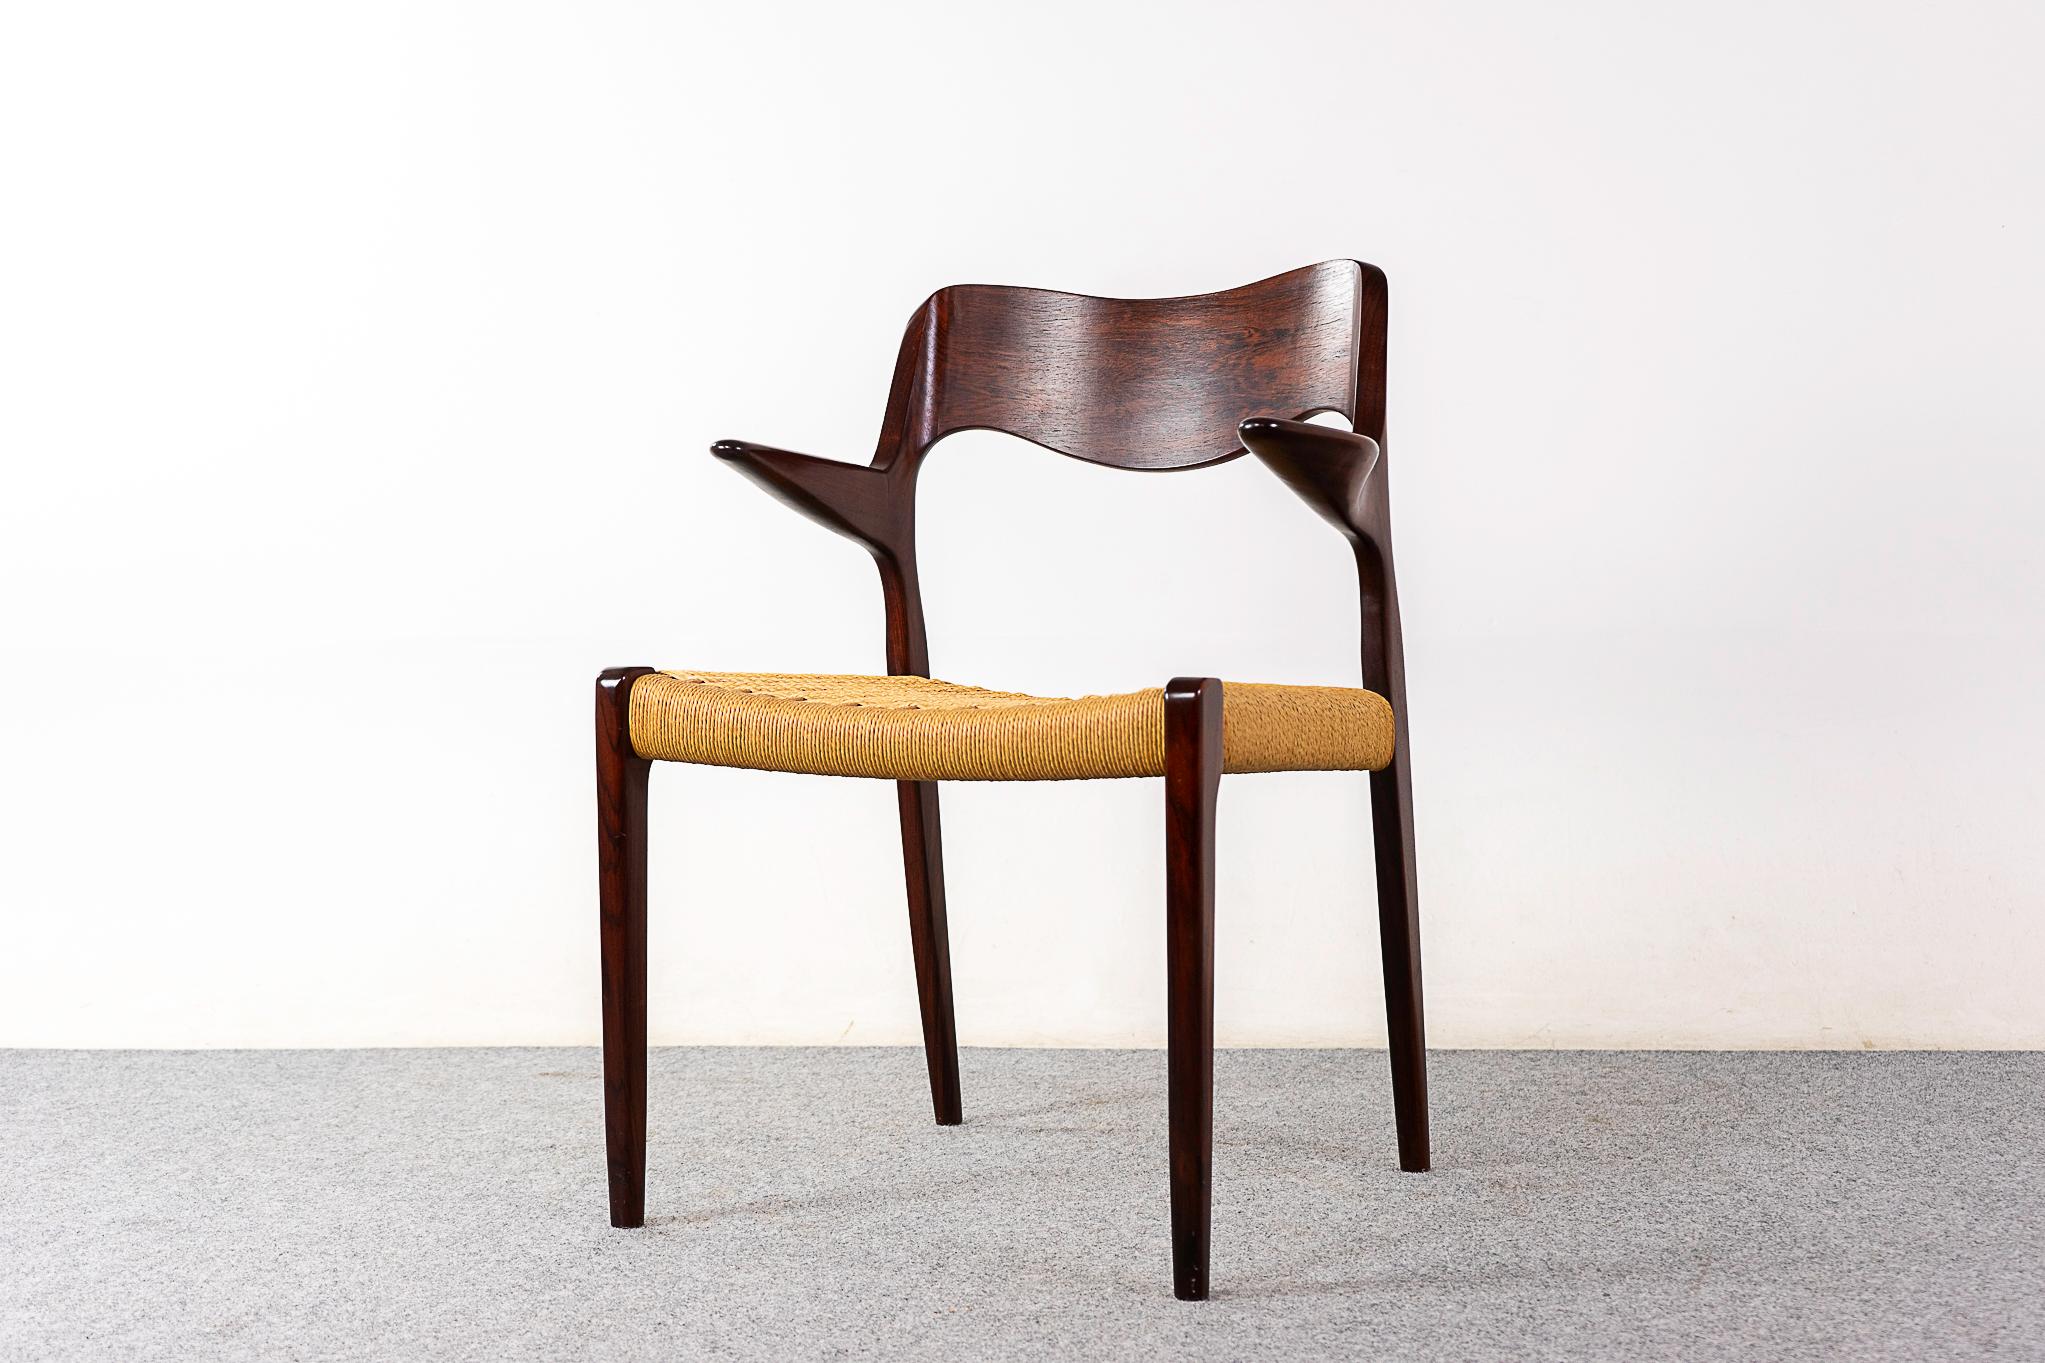 Rosewood model 55 armchair by Niels Otto Moller for J L Moller Mobelfabrik, circa 1950's. Iconic frame with graceful lines, sculptural floating armrests and a meticulously woven paper cord seat. JL Moller maker's mark intact. 

Please inquire for